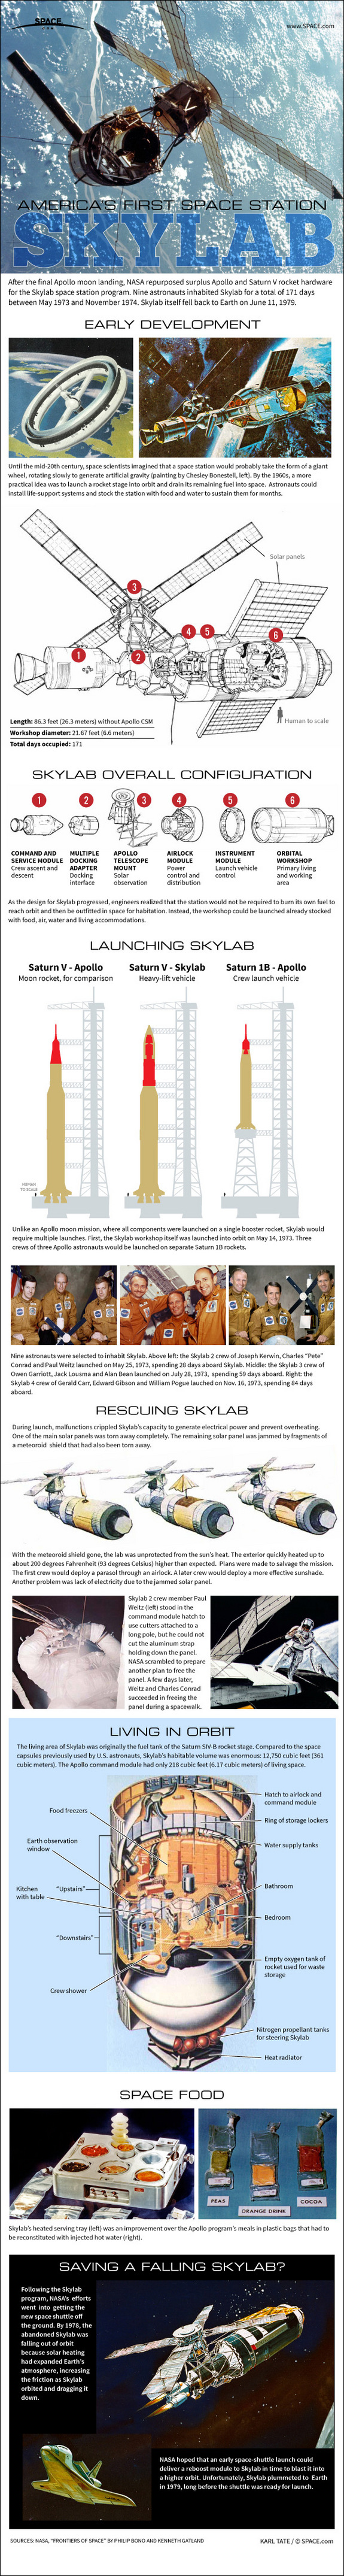 Find out how the International Space Station's ammonia cooling system works in this SPACE.com infographic.